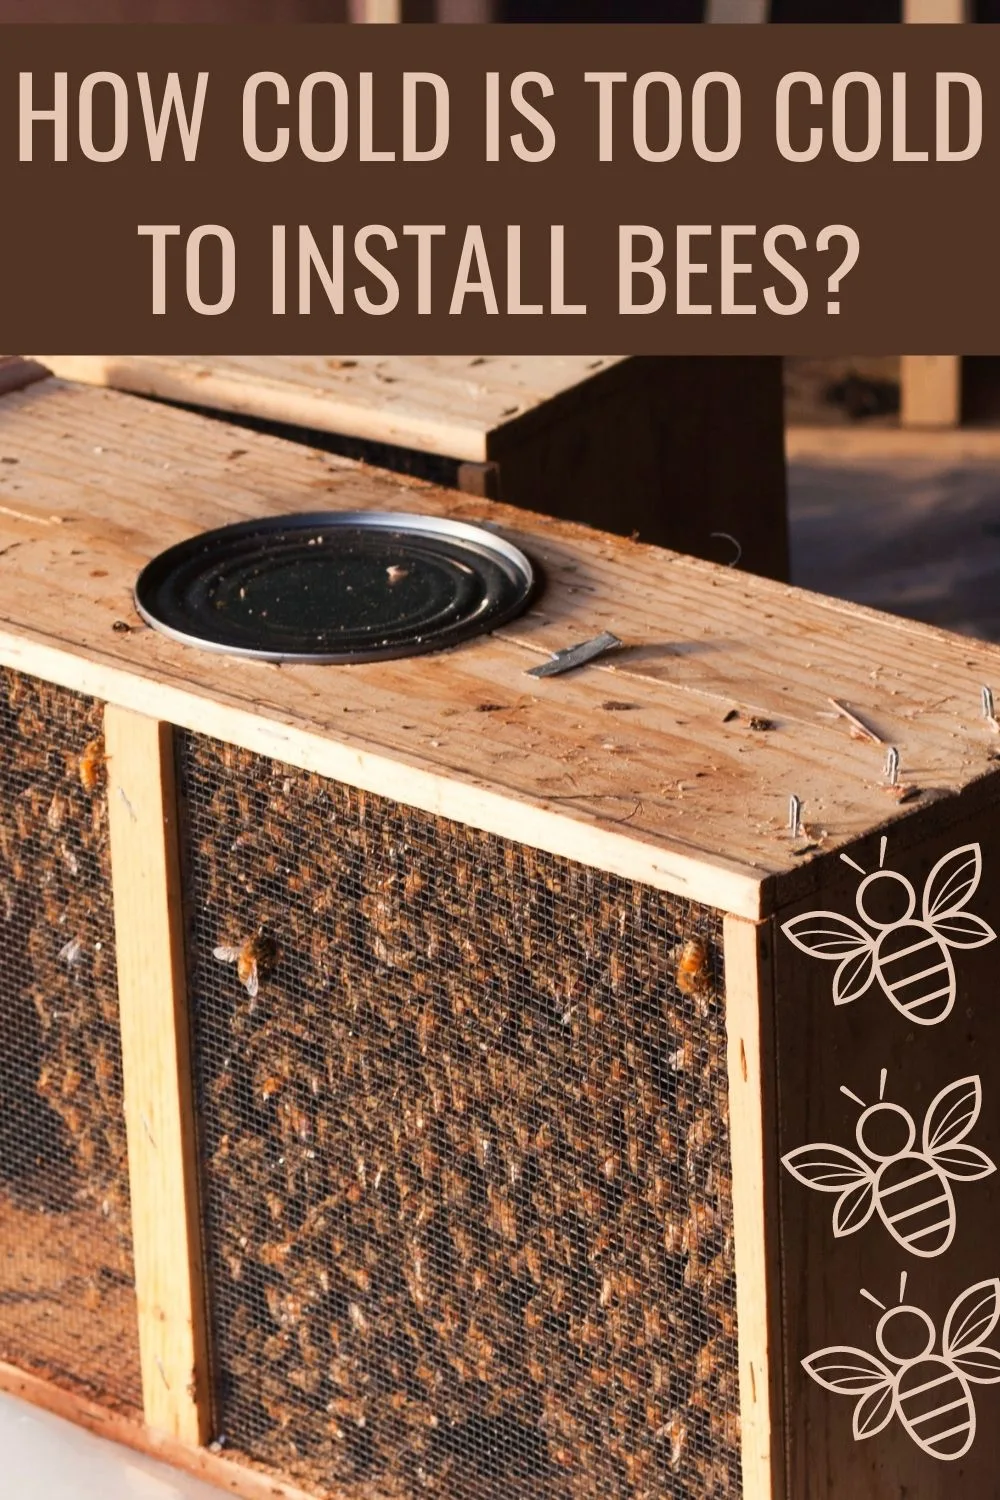 How cold is too cold to install bees